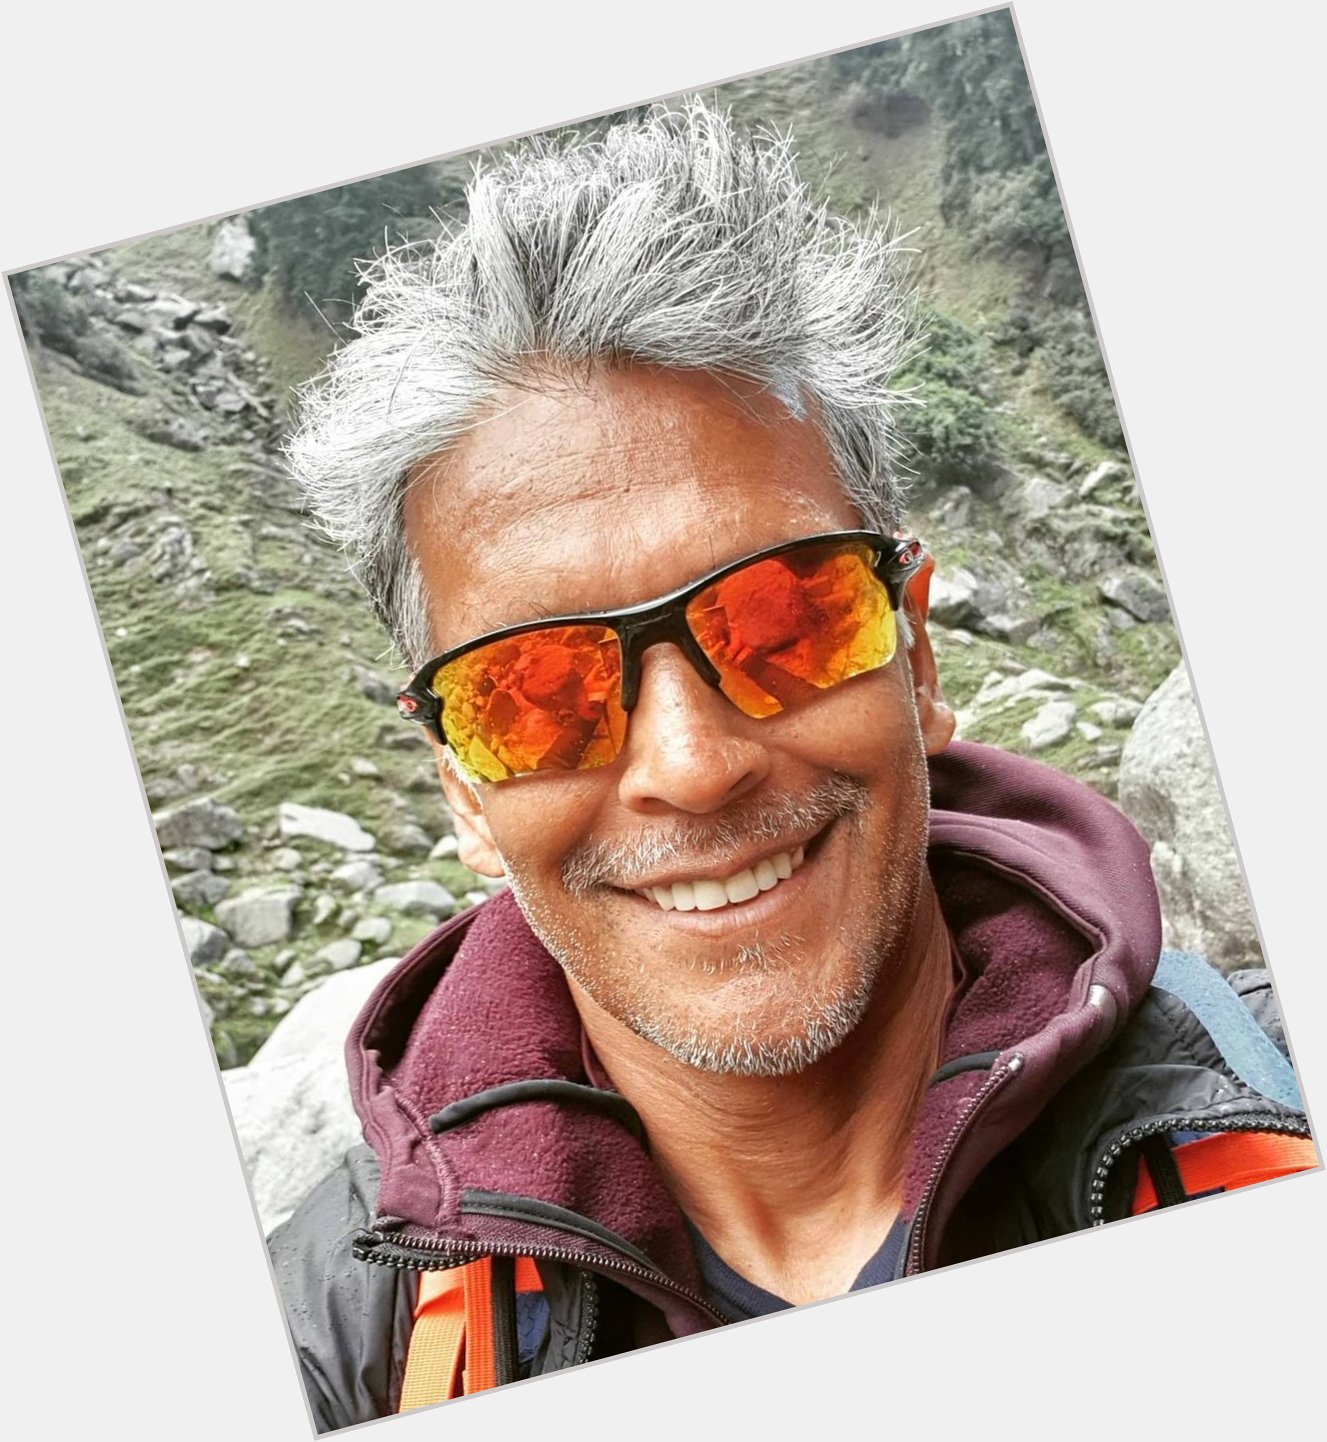 Happy Birthday Milind Soman! You are inspiration for many. Wishing you good health and happiness in coming years. 